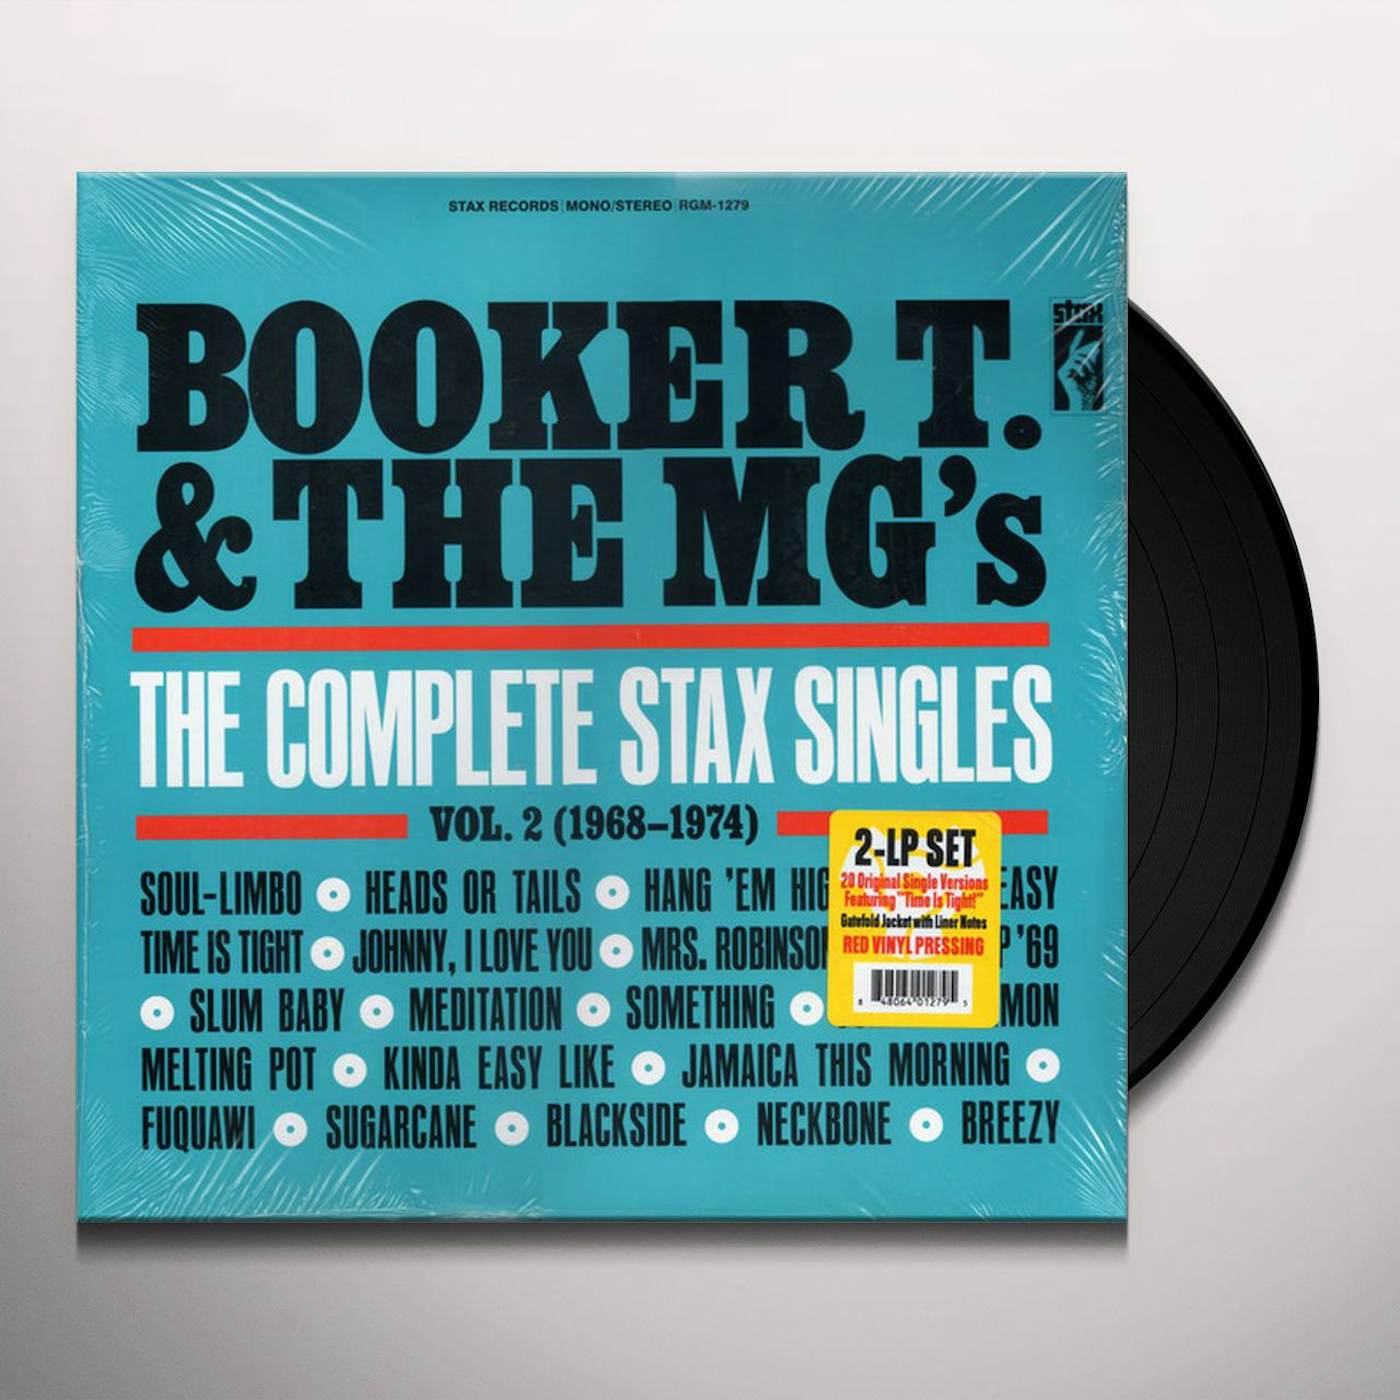 Booker T. & the M.G.'s COMPLETE STAX SINGLES 2 (1968-1974) Vinyl Record